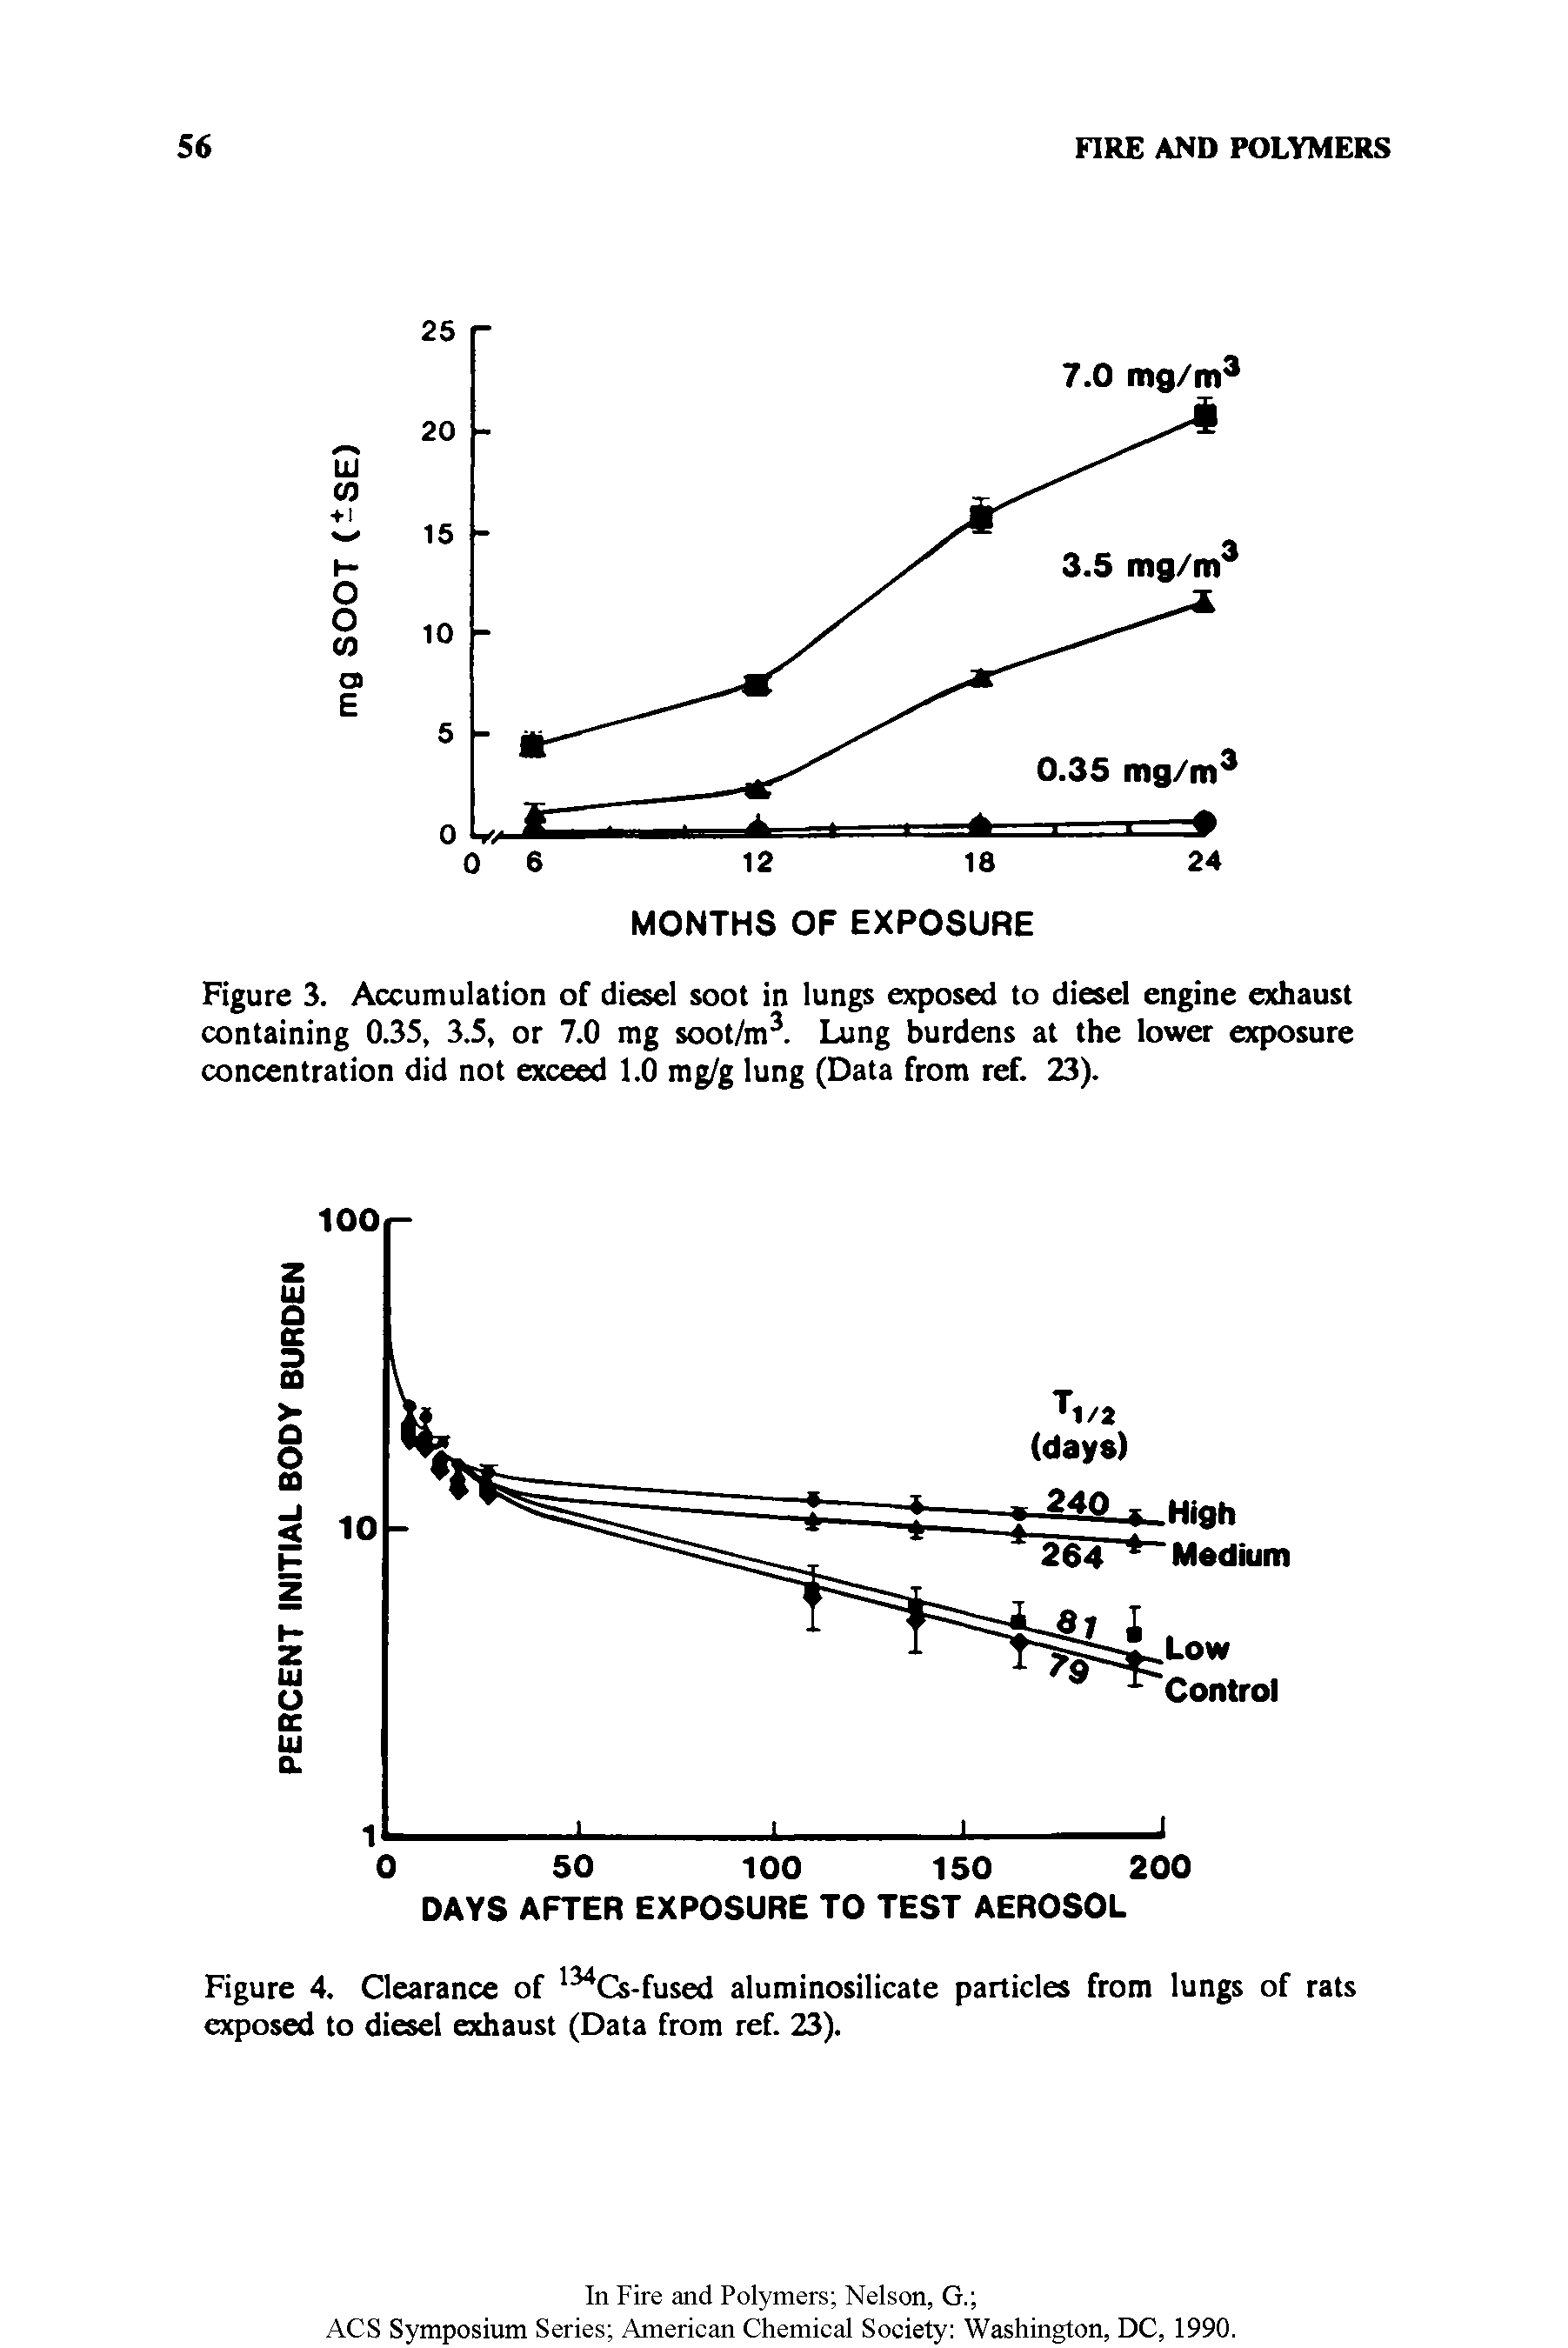 Figure 3. Accumulation of diesel soot in lungs exposed to diesel engine exhaust containing 0.35, 3.5, or 7.0 mg soot/m3. Lung burdens at the lower exposure concentration did not exceed 1.0 mg/g lung (Data from ref. 23).